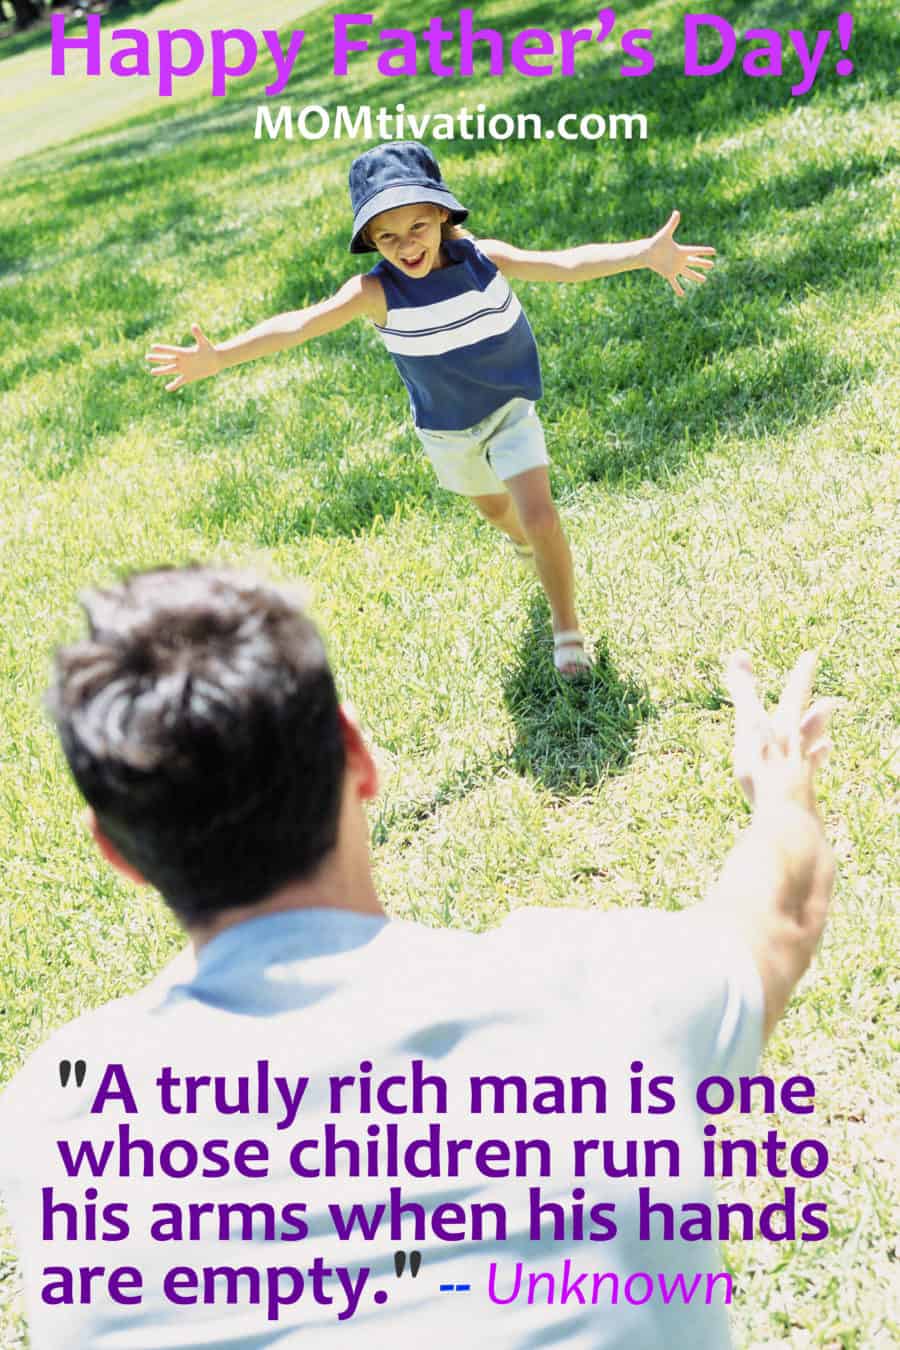  "A truly rich man is one whose children run into his arms when his hands are empty." -- Unknown